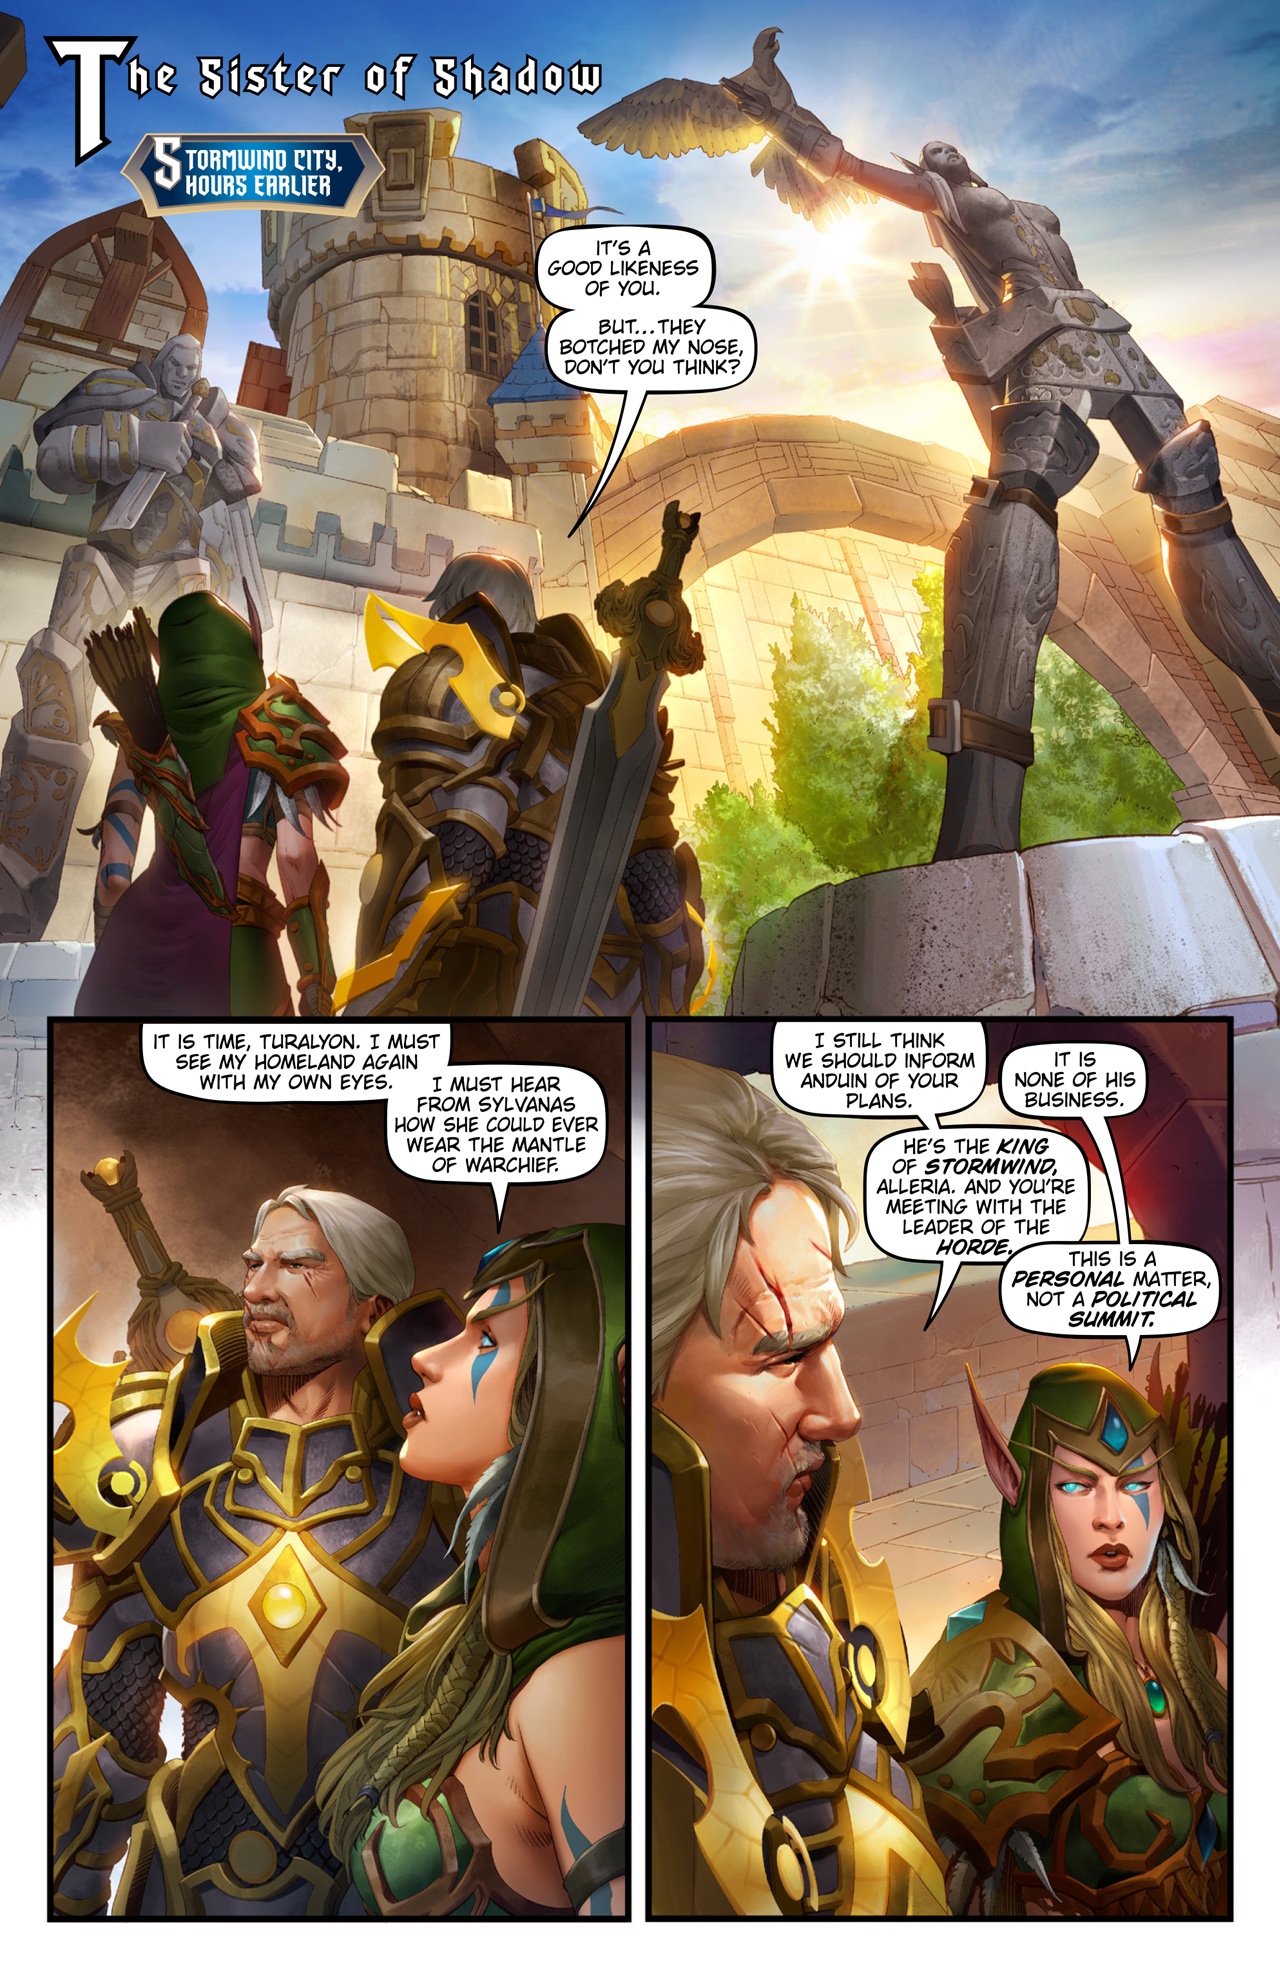 New Comic World Of Warcraft Battle For Azeroth 3 — “three Sisters” — World Of Warcraft